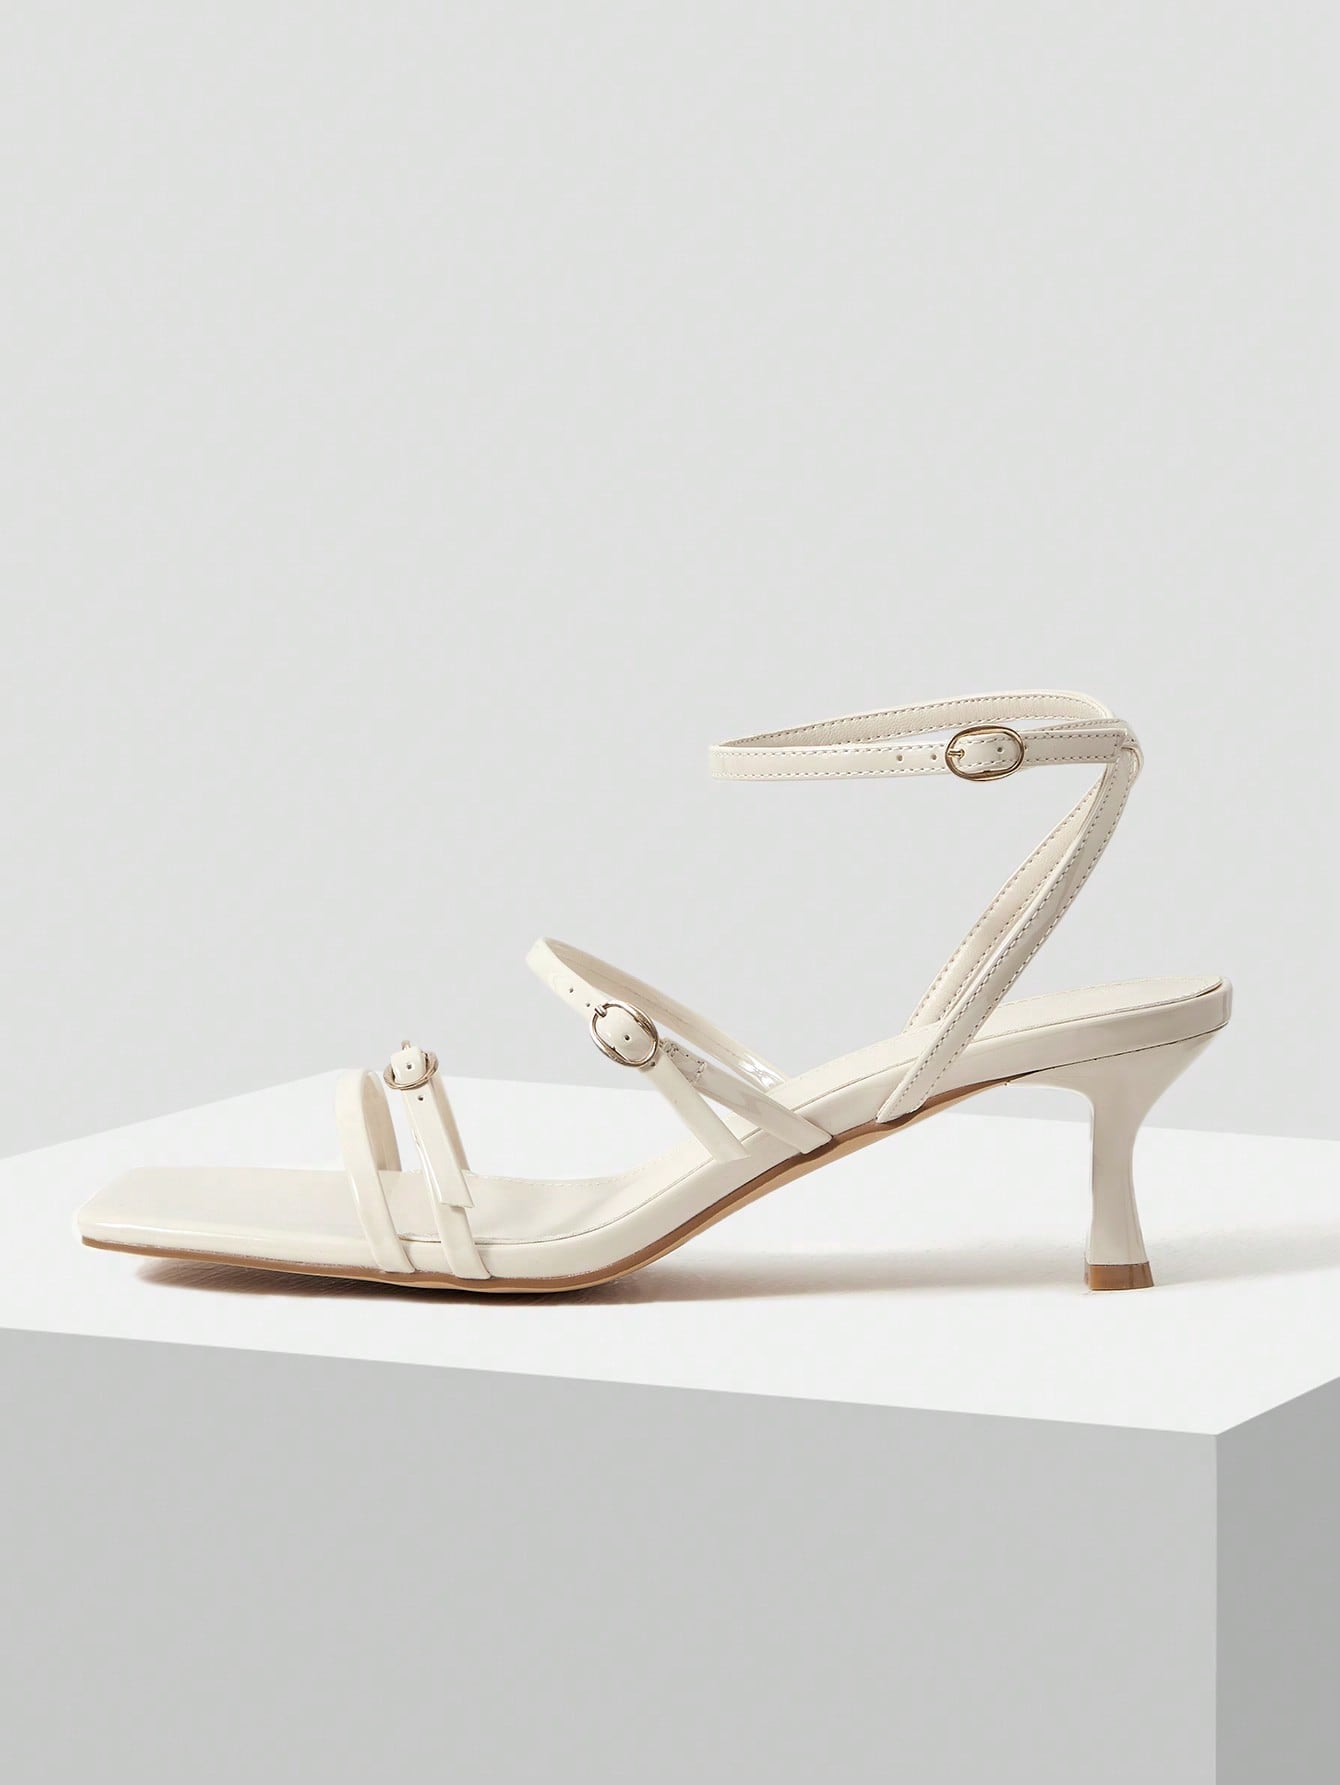 BUCKLE DETAIL ANKLE STRAP HEELED SANDALS